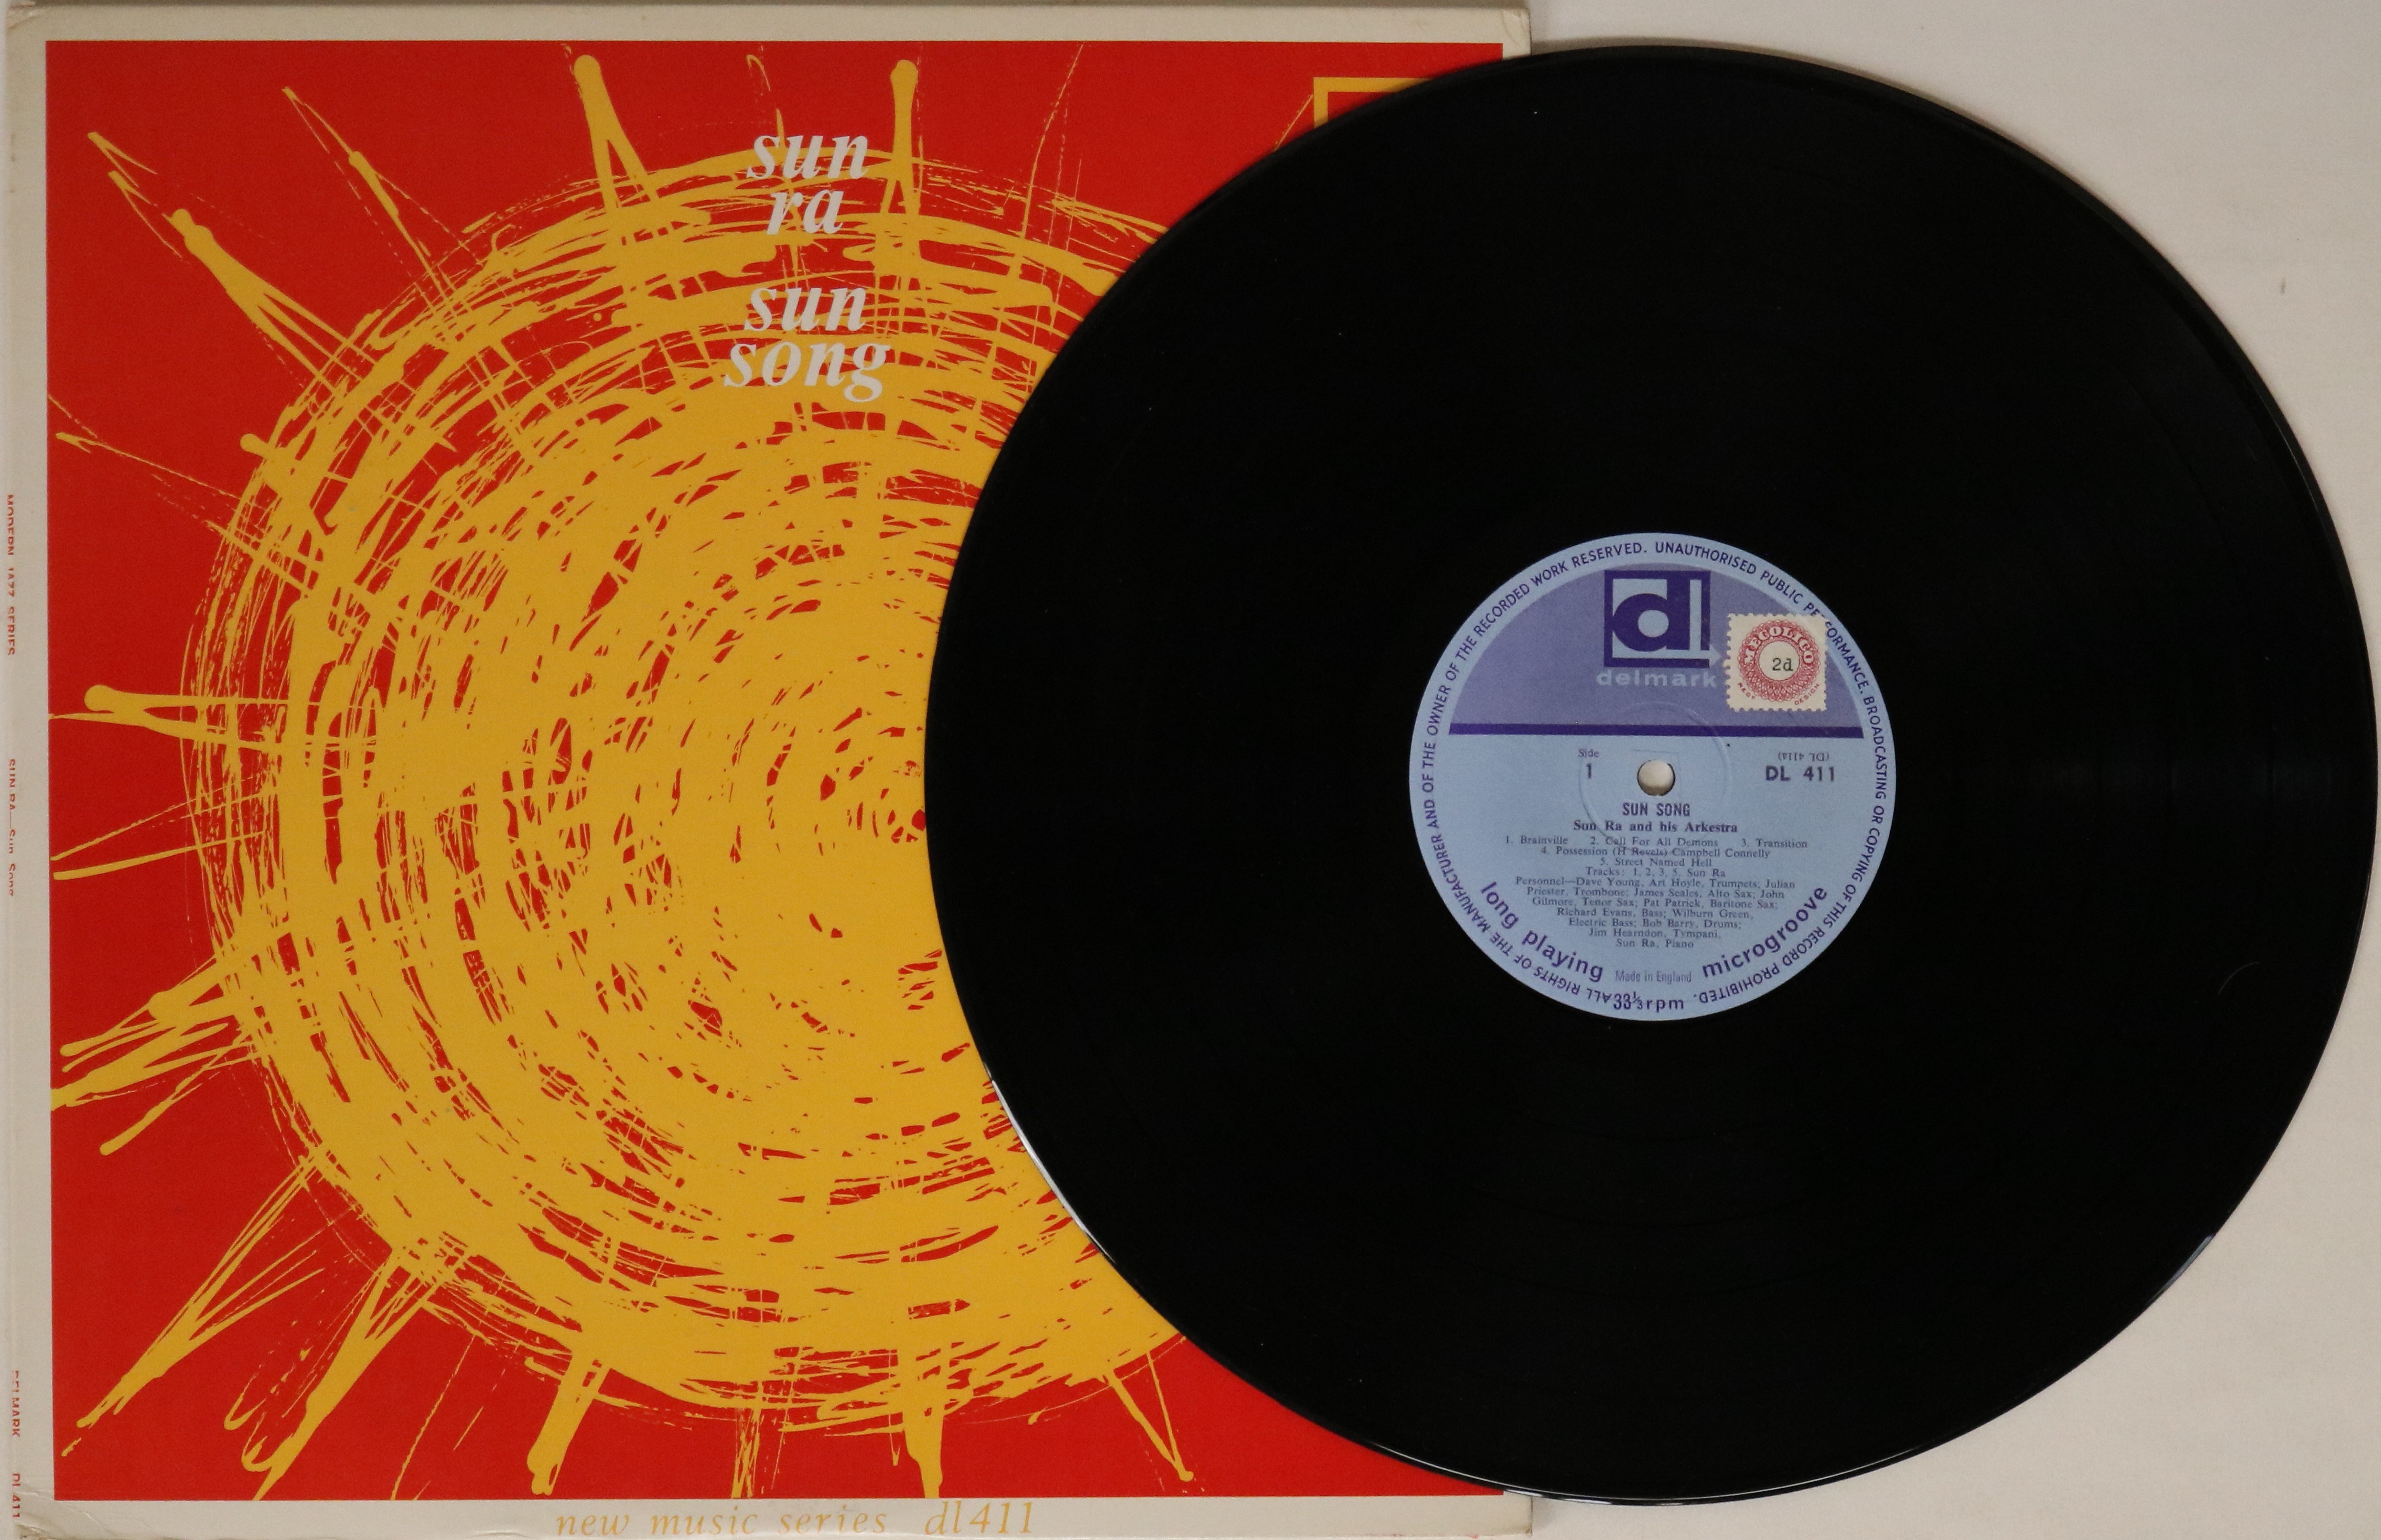 SUN RA - LPs. Entering the heliocentric world of Sun Ra with these 4 x original title LPs. - Image 7 of 7